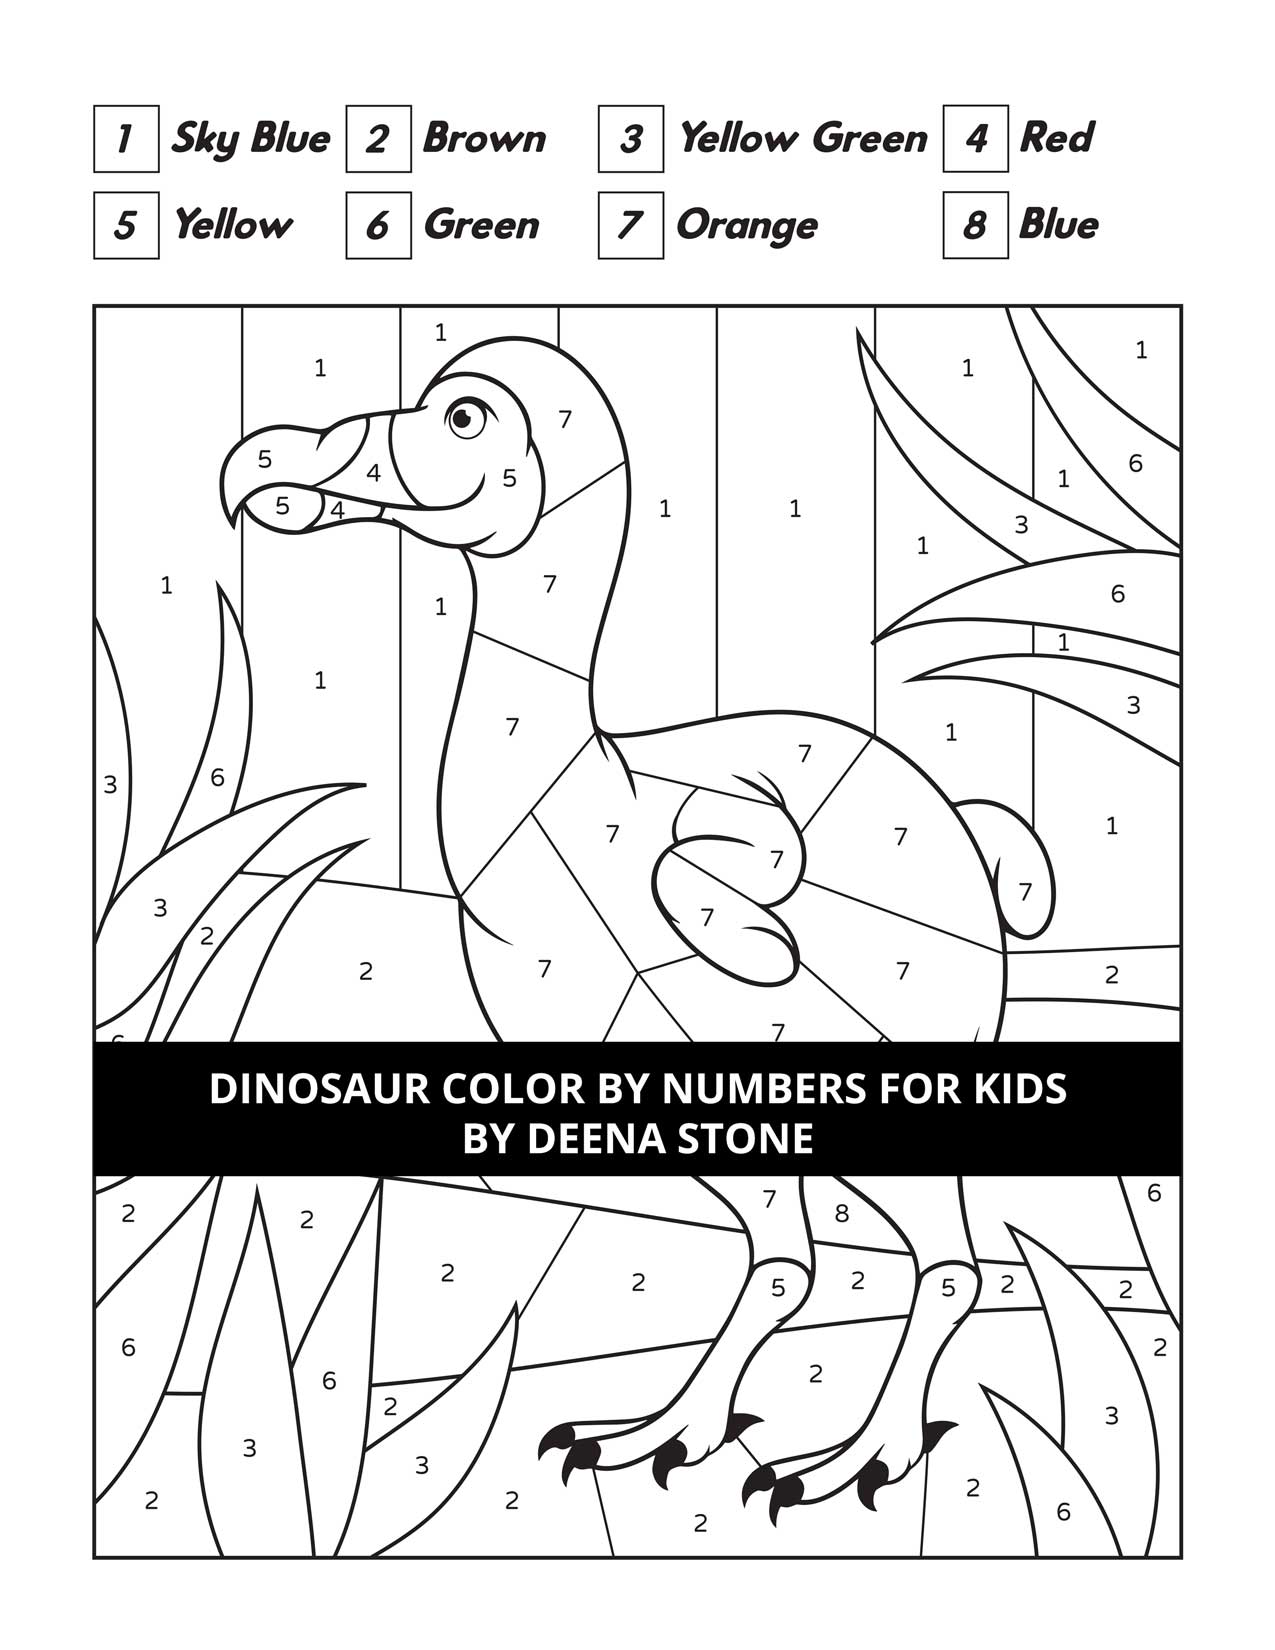 Dinosaur Color By Numbers For Kids - Deena Stone